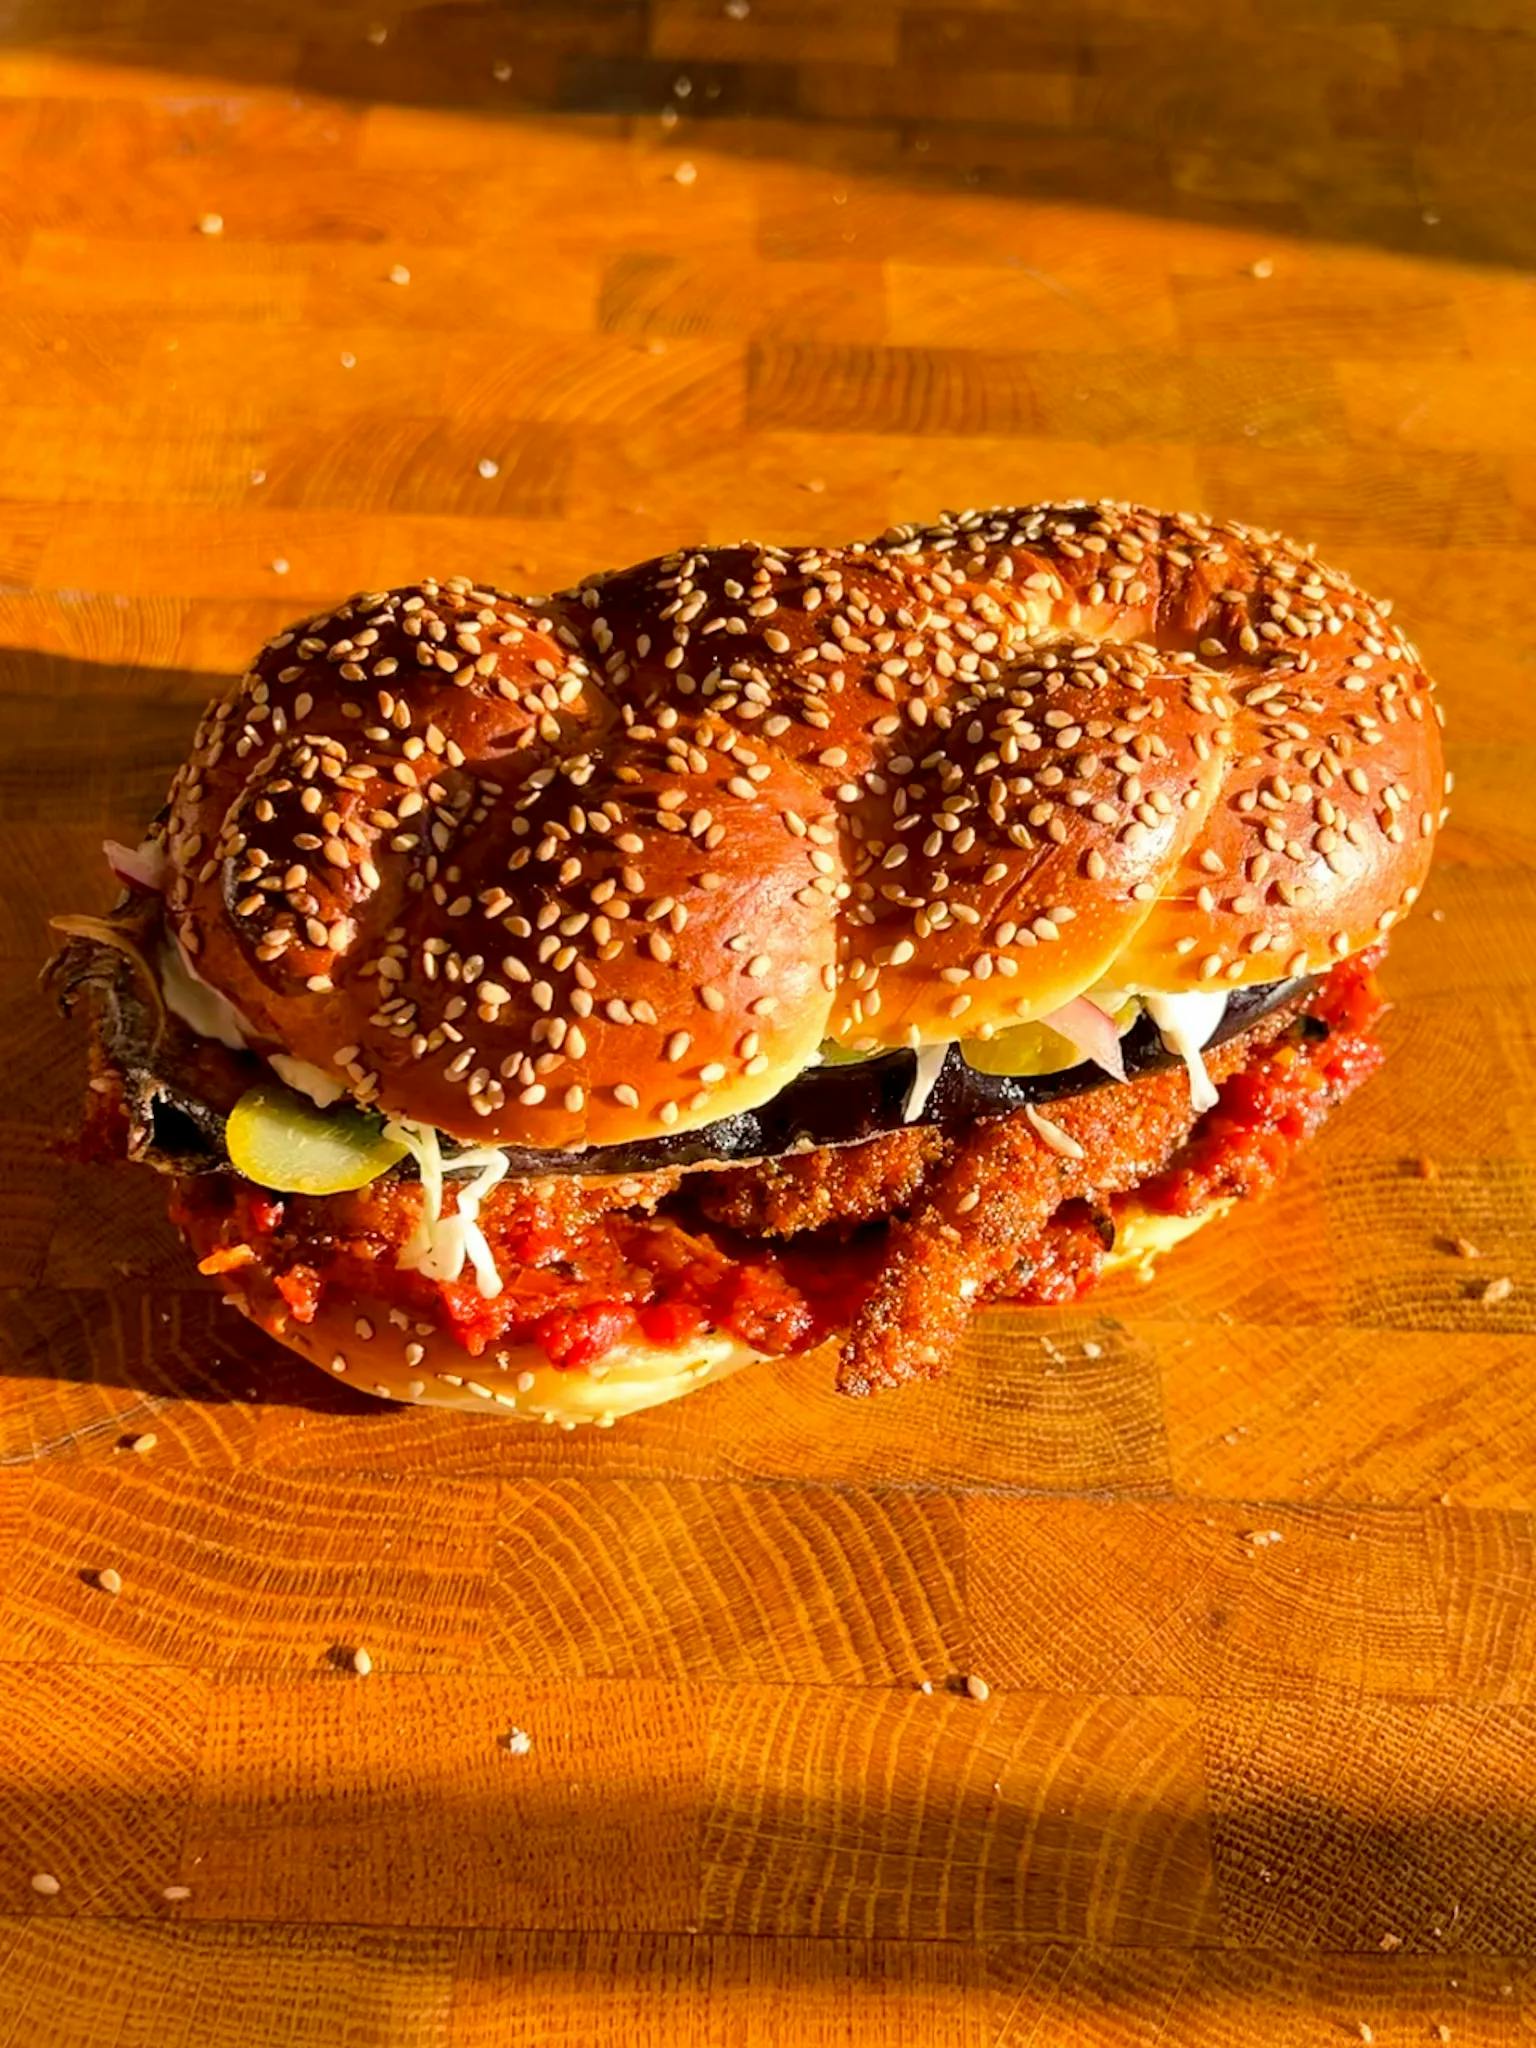 Picture for Friday Challah Schnitzel Sandwich